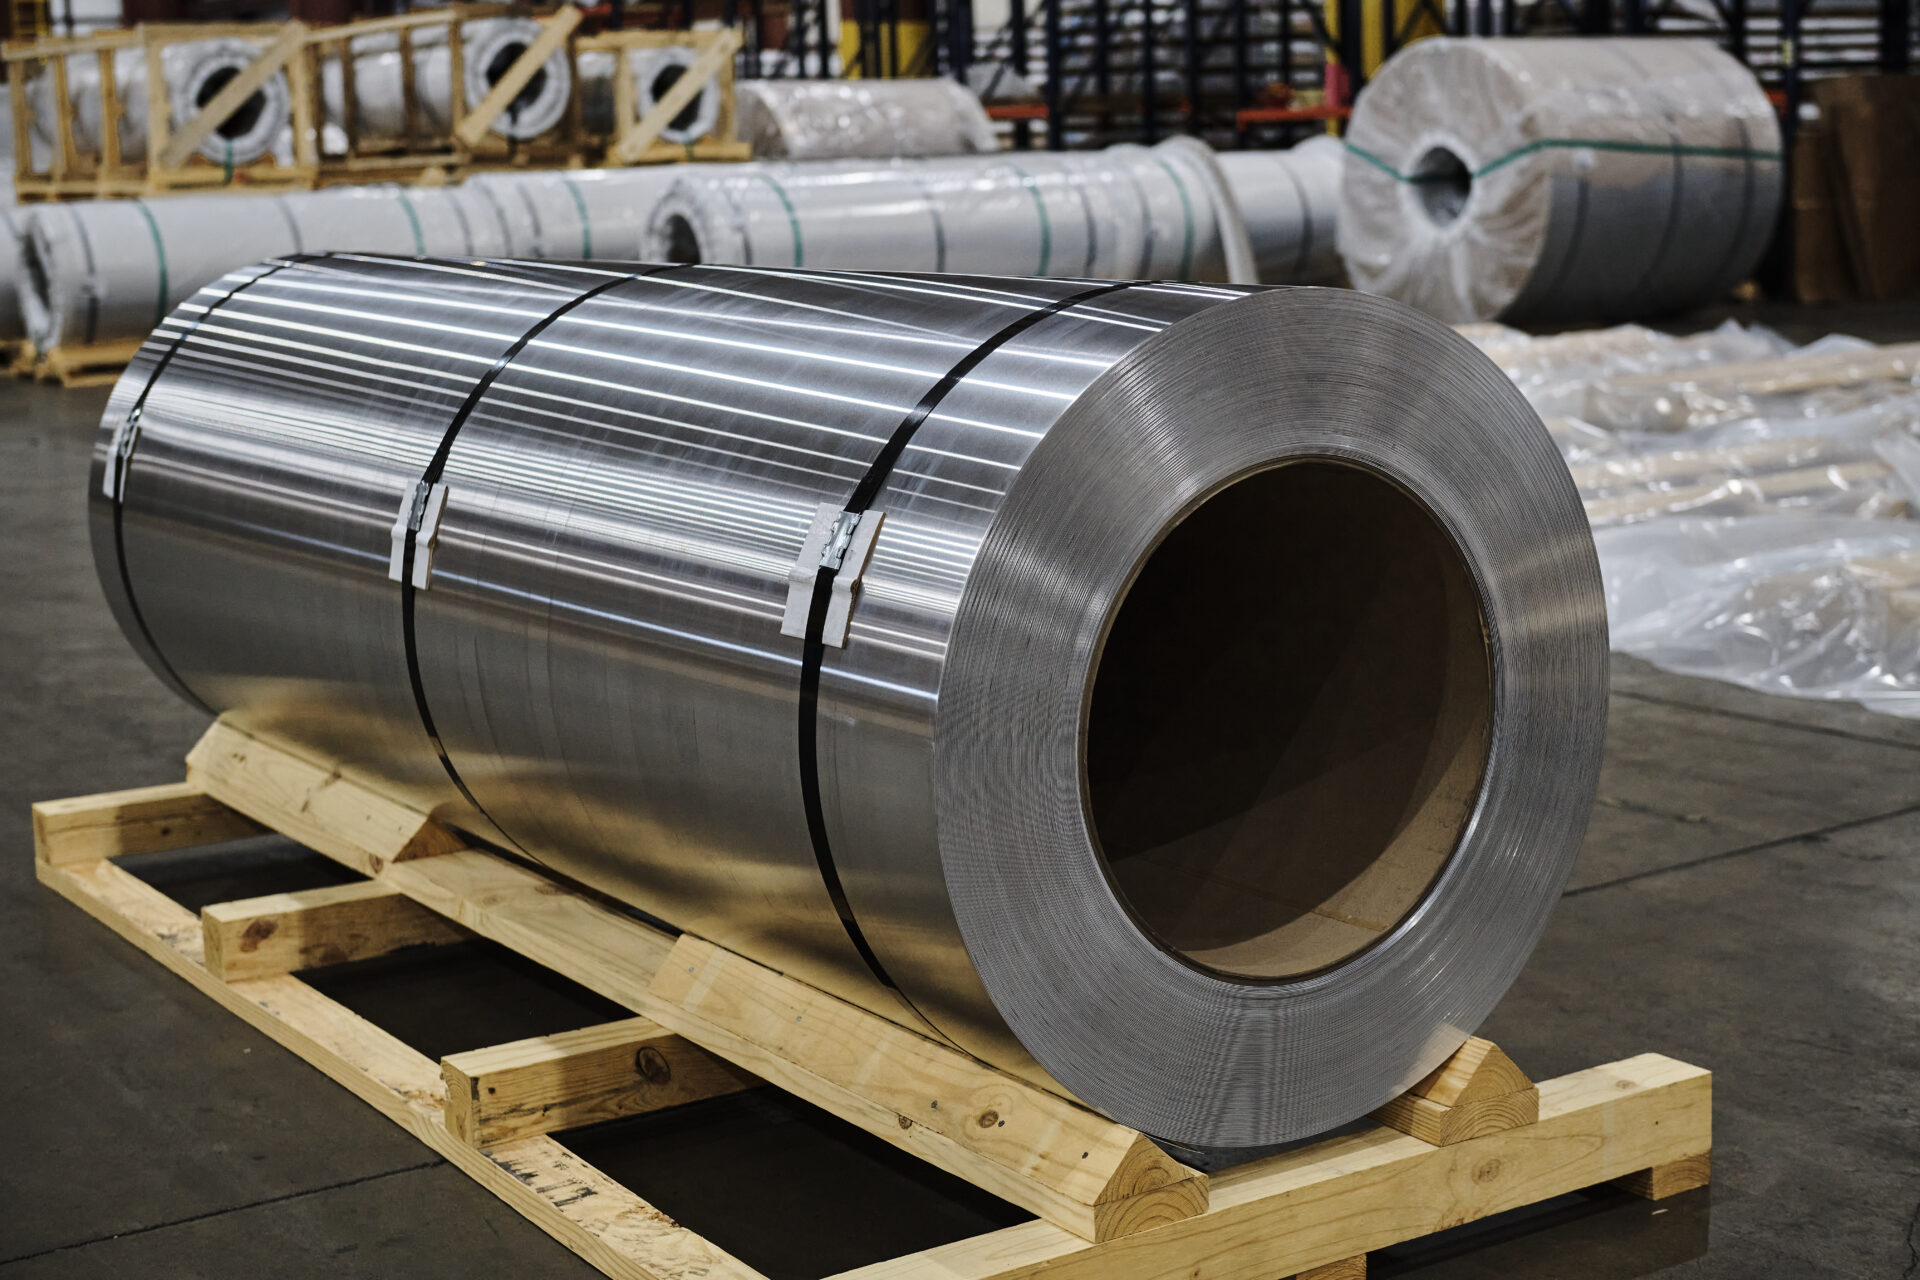 aluminum coil roll strapped onto a pallet